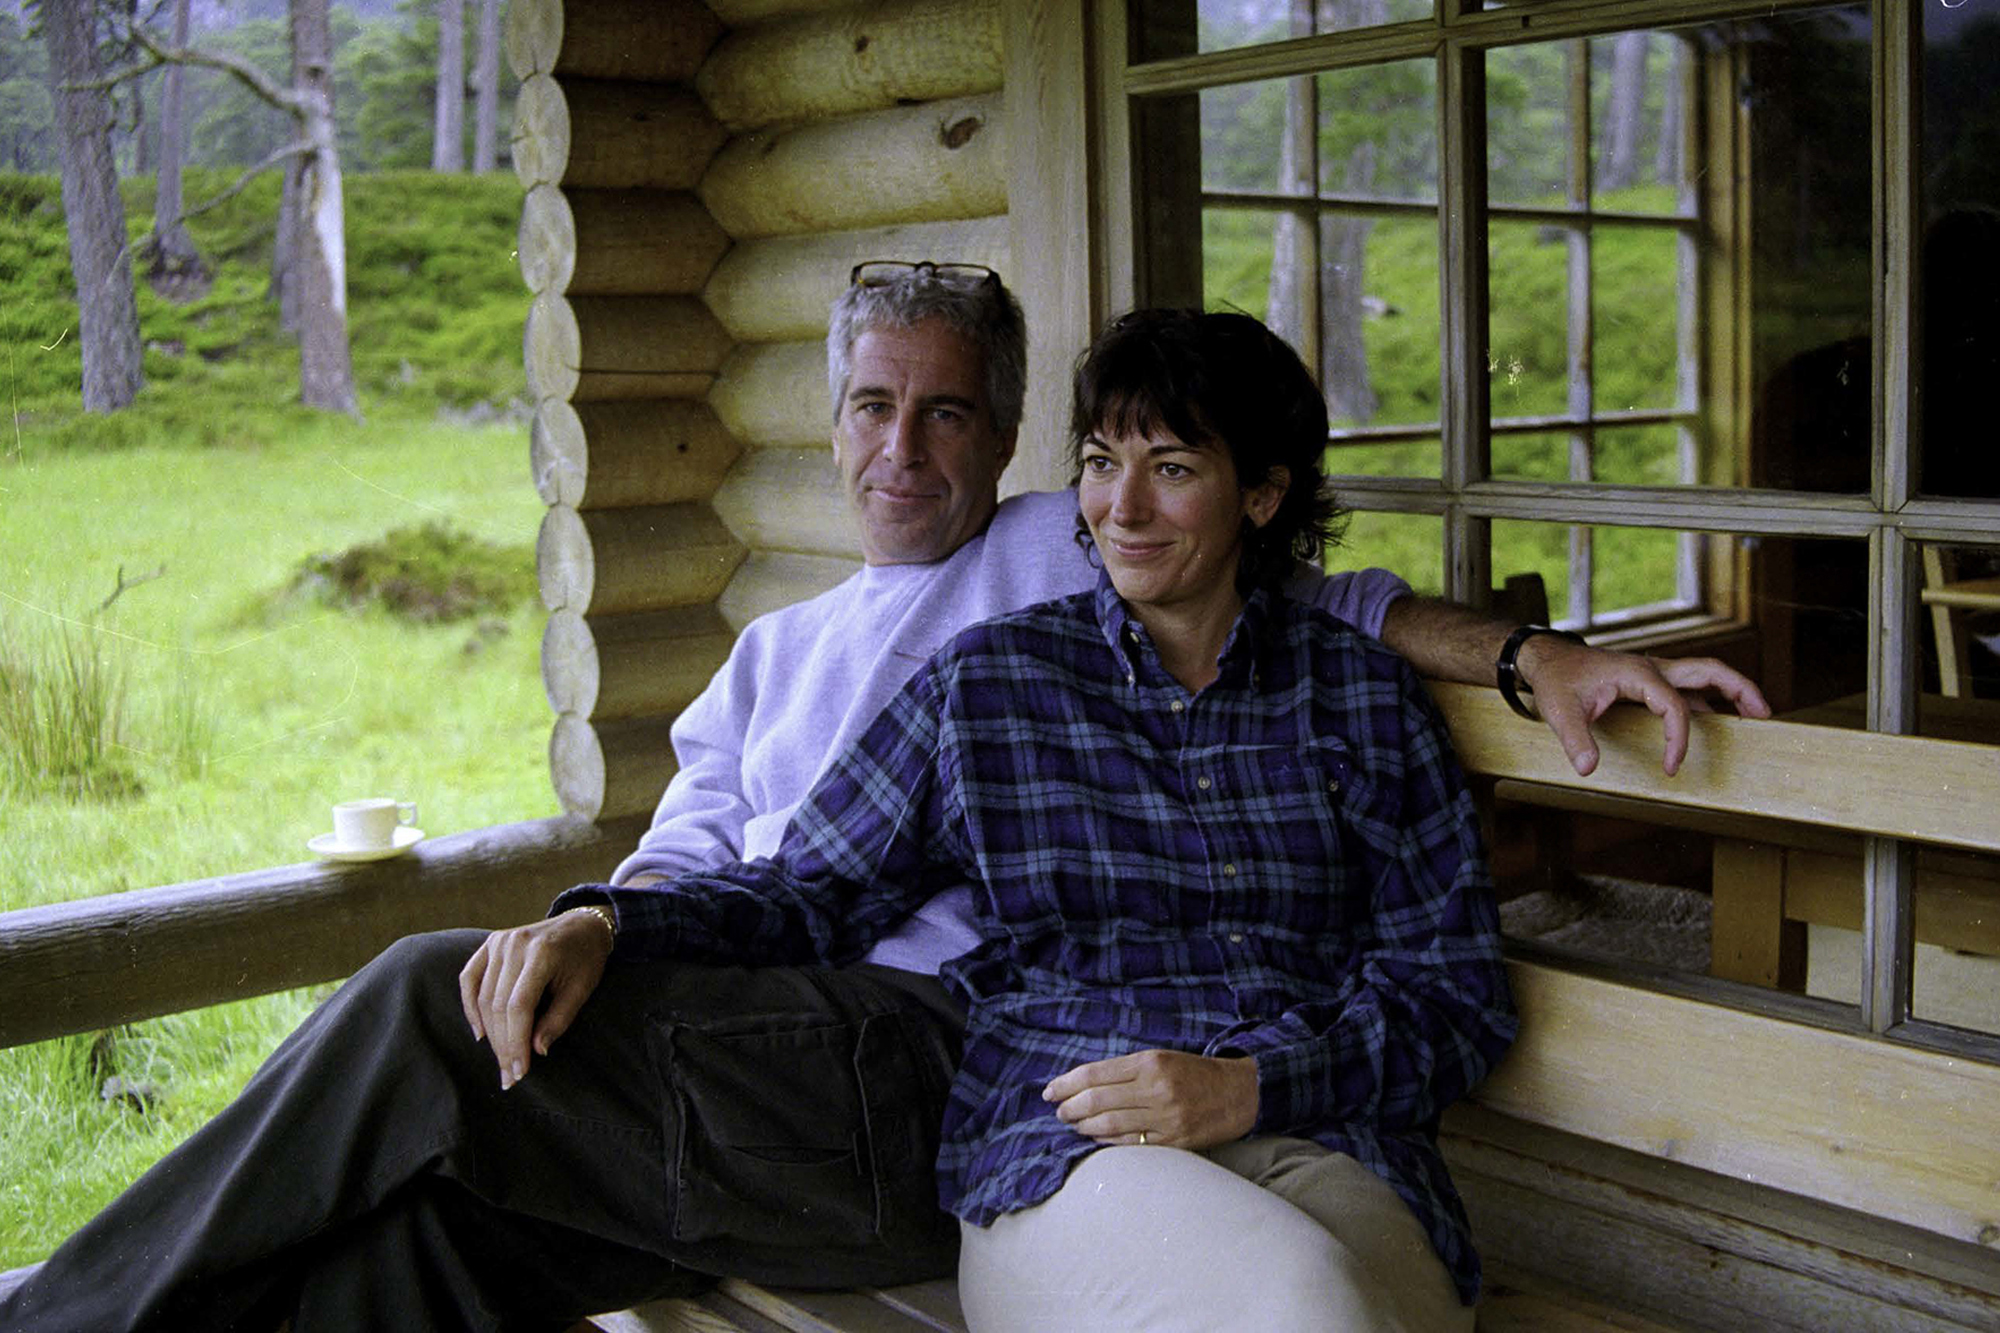 Photographs of Ghislaine Maxwell and Jeffrey Epstein